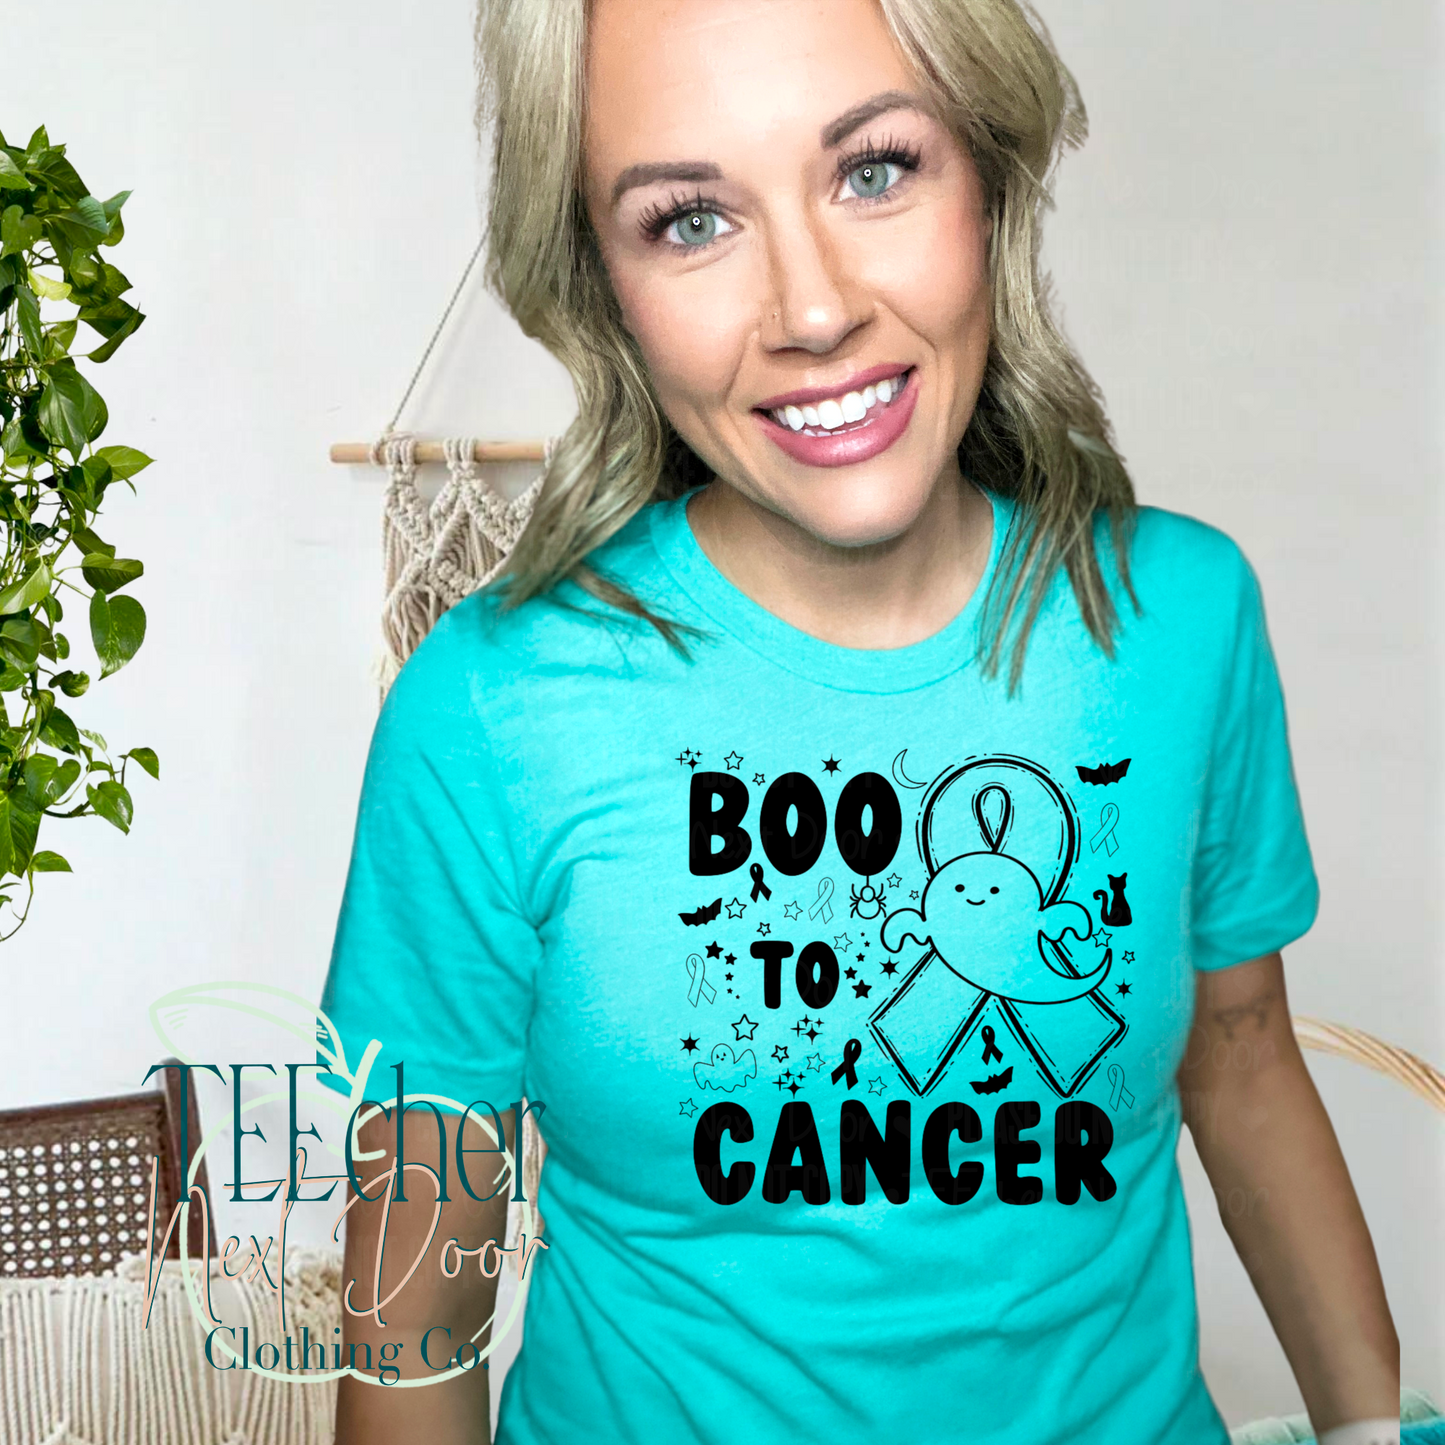 BOO to Cancer!